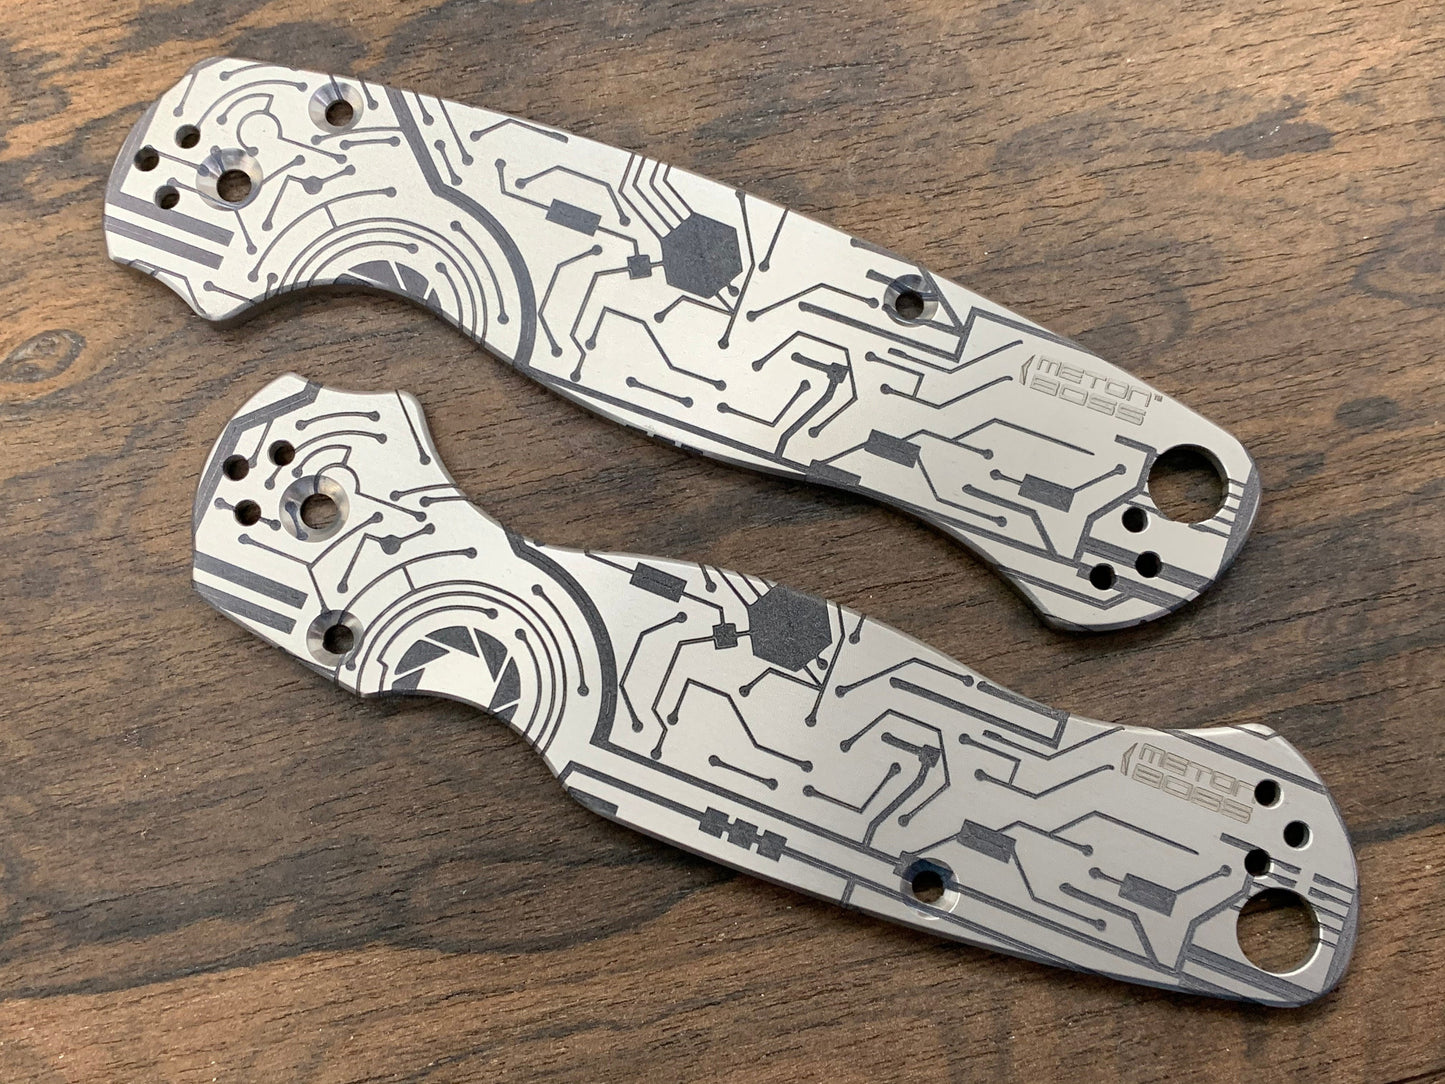 CIRCUIT BOARD engraved Titanium scales for Spyderco Paramilitary 2 PM2